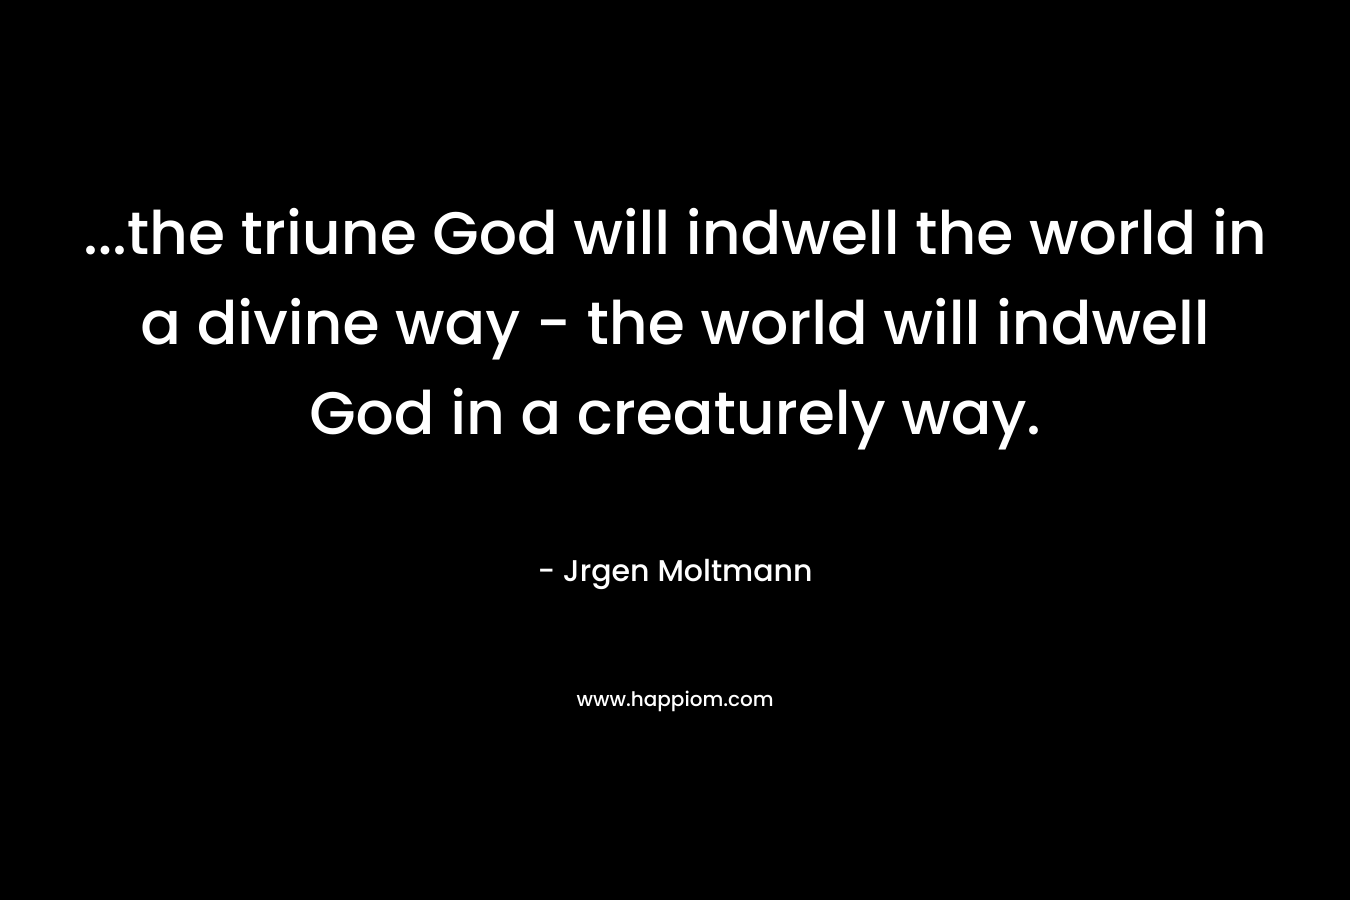 ...the triune God will indwell the world in a divine way - the world will indwell God in a creaturely way.